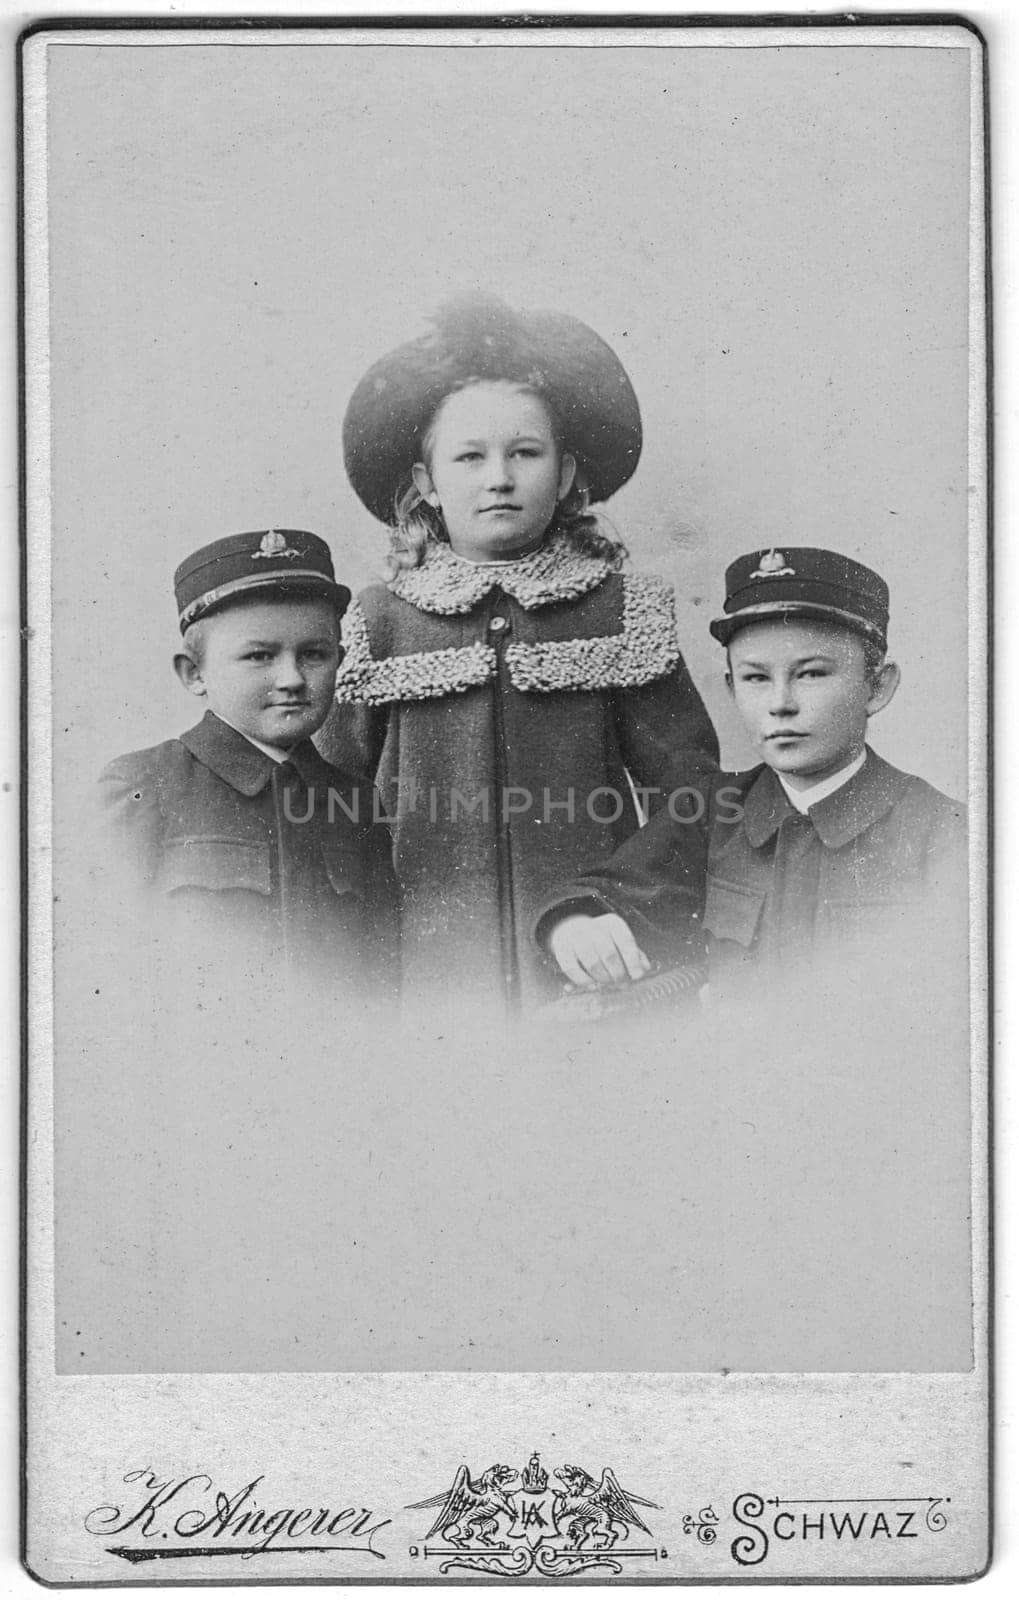 SCHWAZ - TIROL, AUSTRIA-HUNGARY - CIRCA 1900: Vintage cabinet card shows portrait of cute siblings two brothers and hers sister. Edwardian fashion. Photo was taken in a photo studio. Photo was taken in Austro-Hungarian Empire or also Austro-Hungarian Monarchy